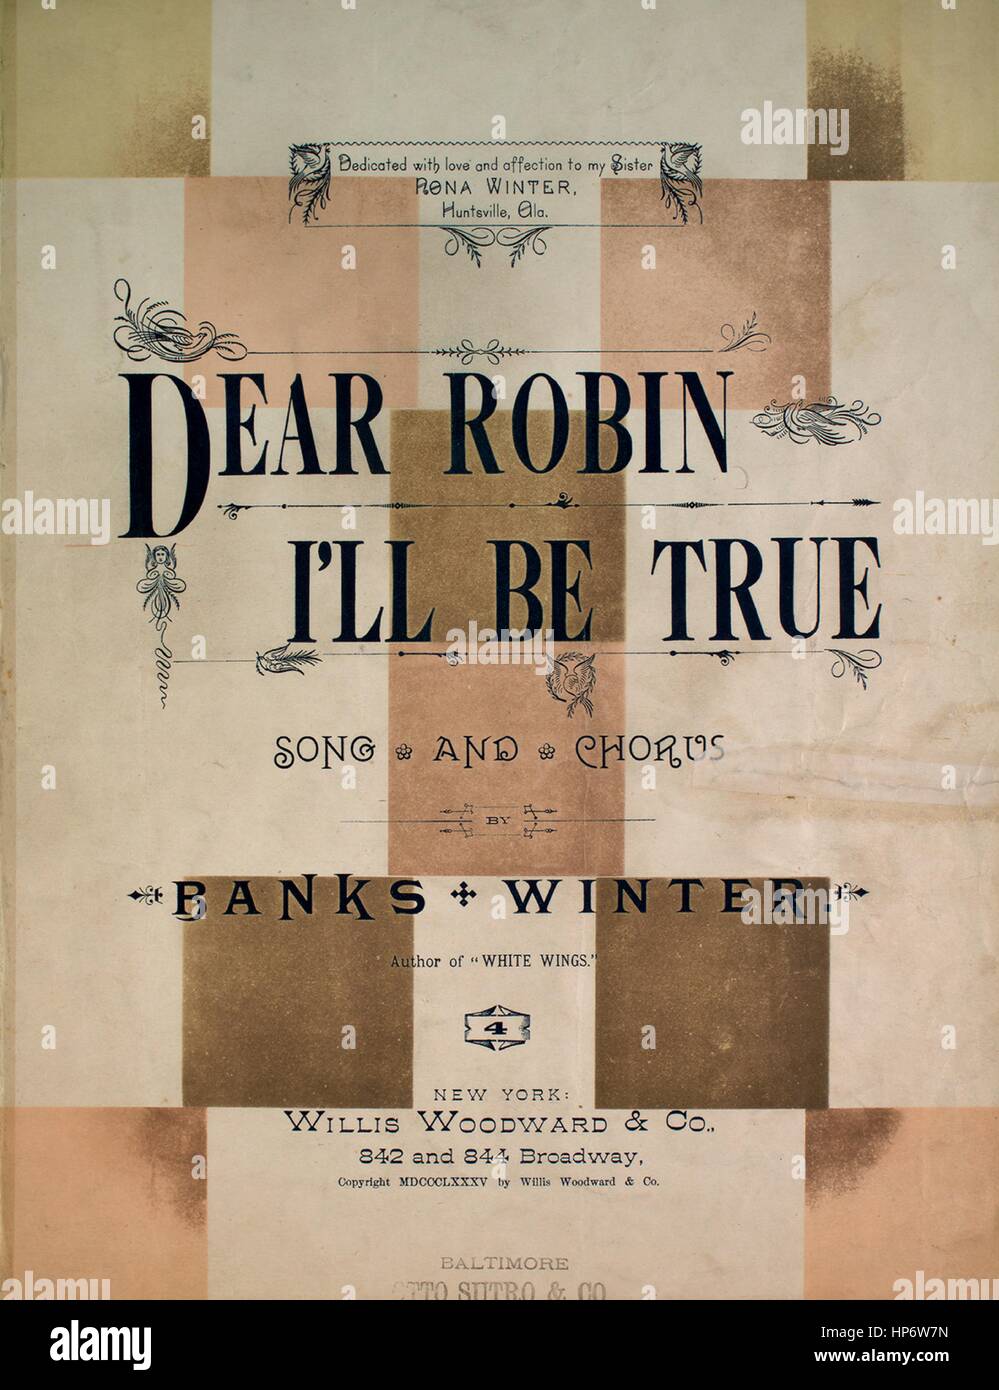 Sheet music cover image of the song 'Dear Robin I'll Be True Song and Chorus', with original authorship notes reading 'By Banks Winter', United States, 1885. The publisher is listed as 'Willis Woodward and Co., 842 and 844 Broadway', the form of composition is 'strophic with chorus', the instrumentation is 'piano and voice', the first line reads 'A heart heavy laden with sorrow and pain, is all that is left me today', and the illustration artist is listed as 'Birch'. Stock Photo